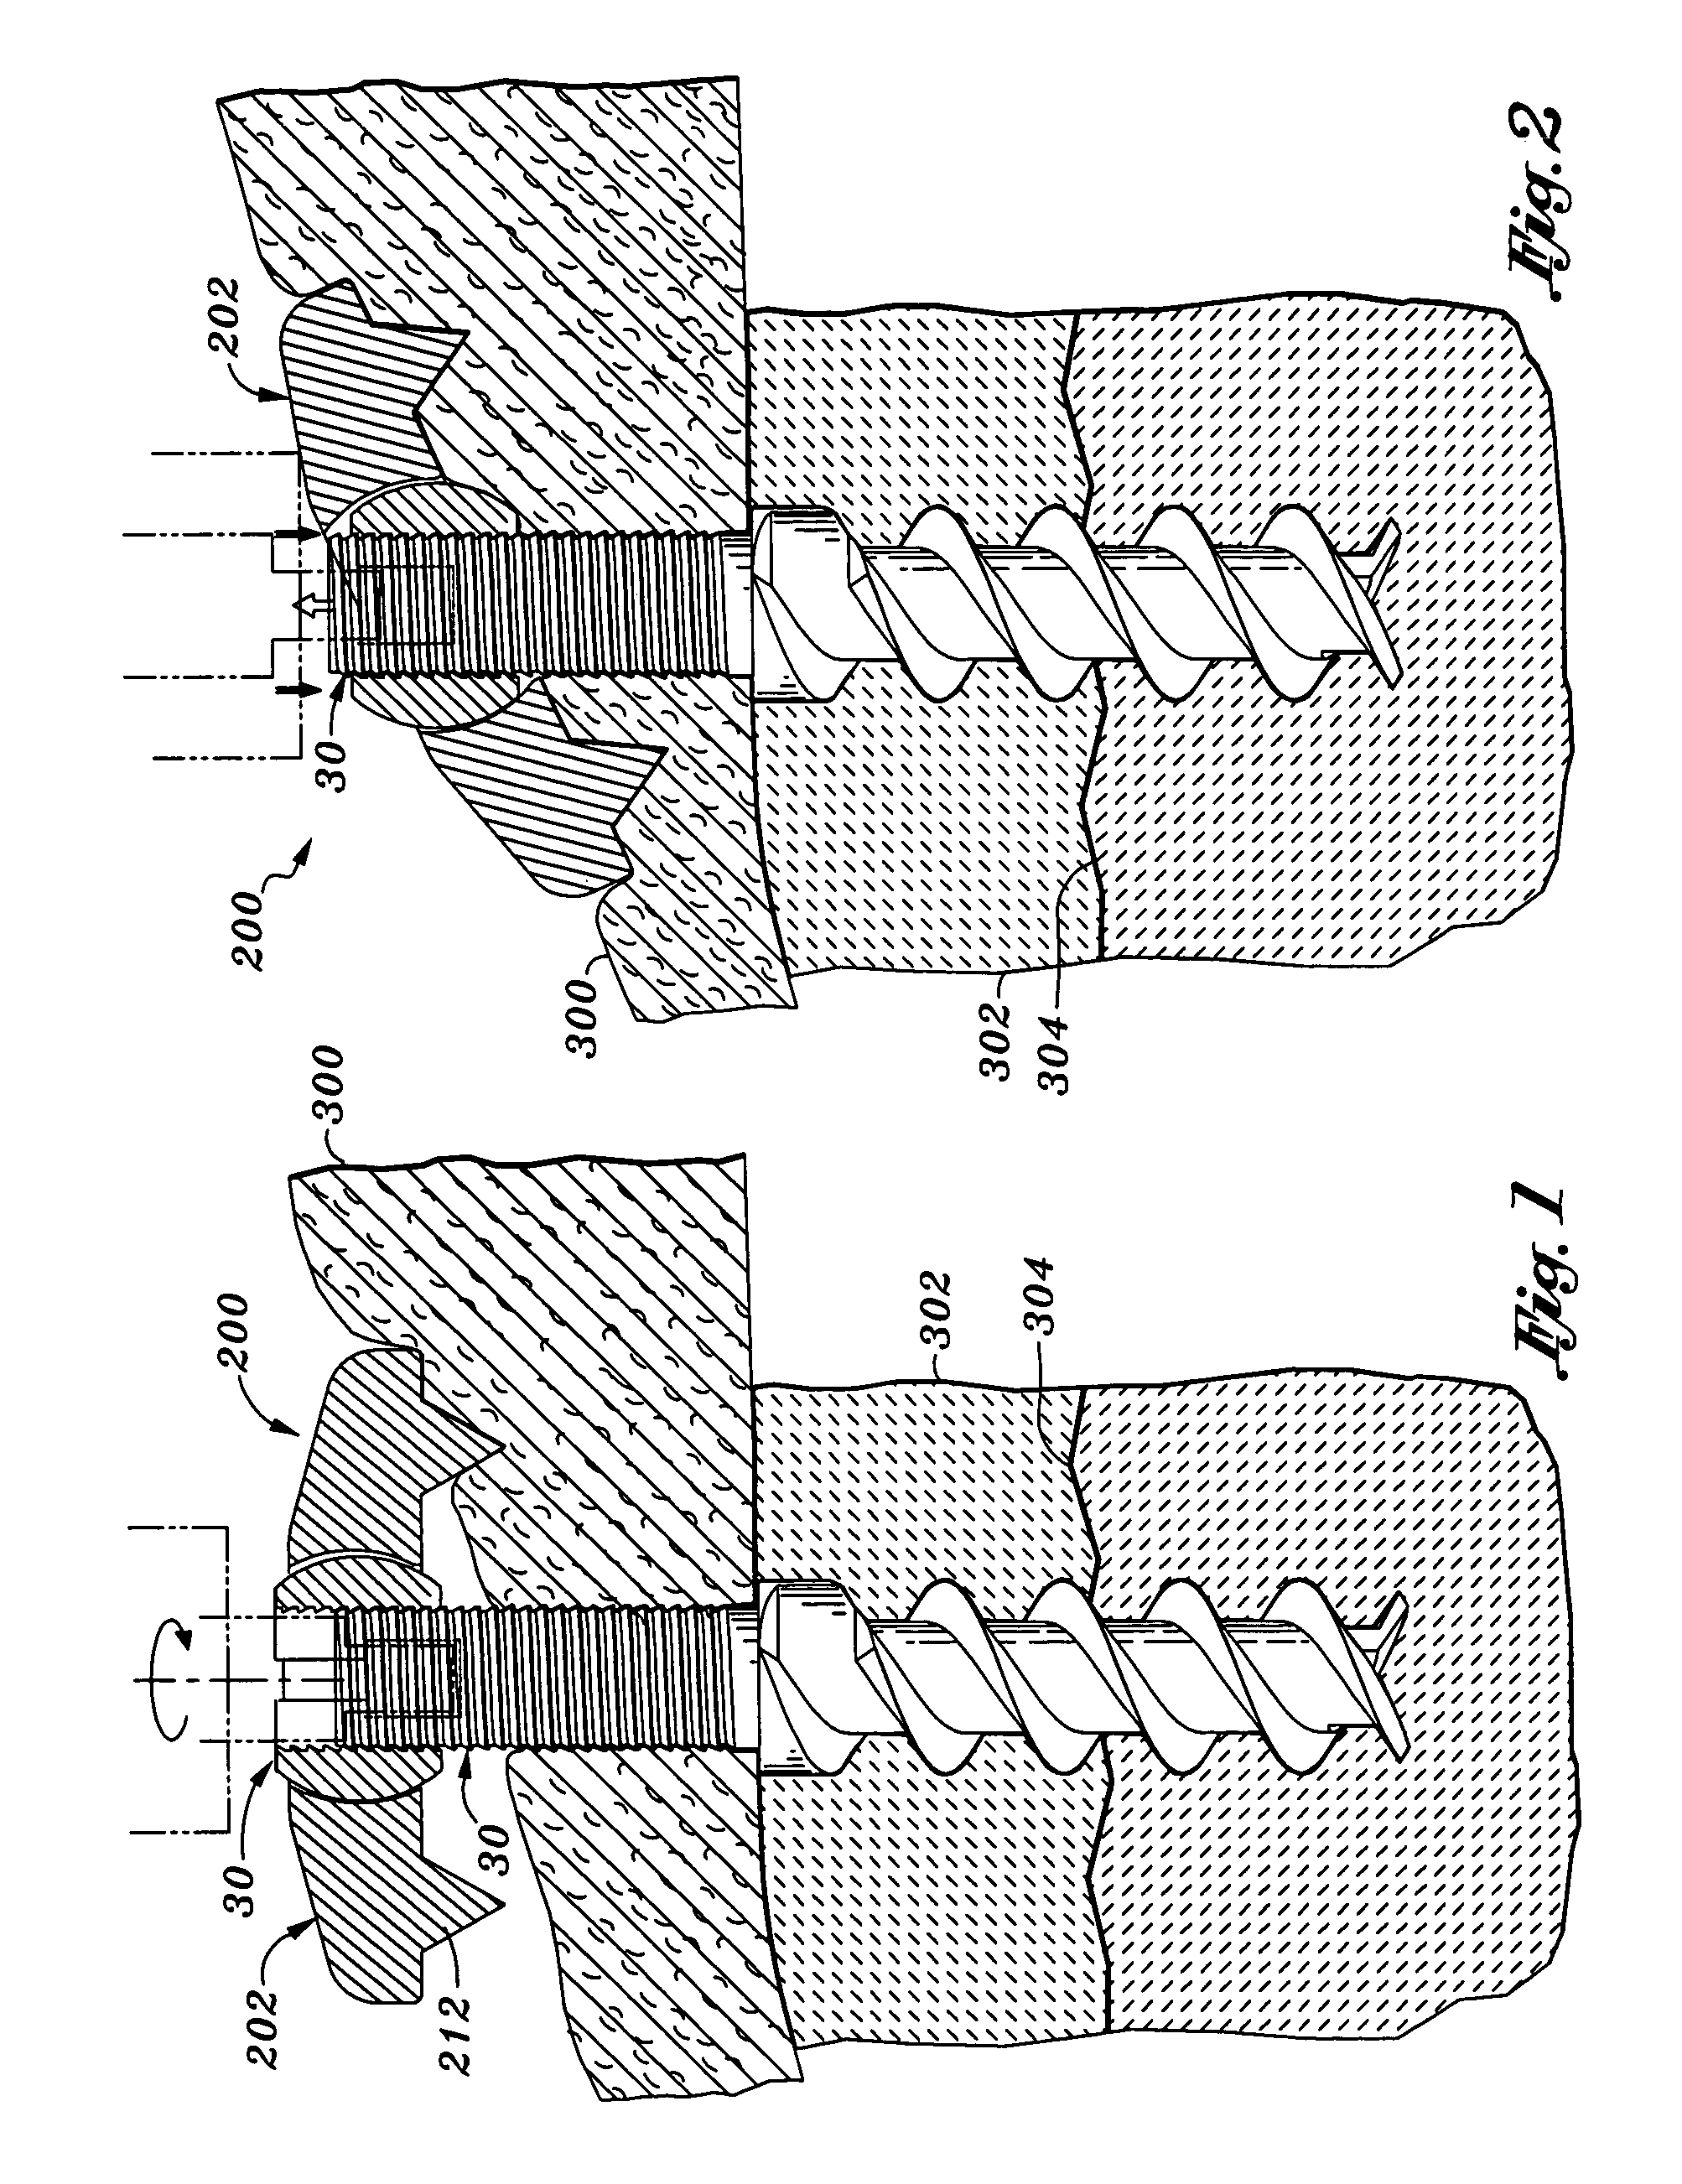 Soft tissue anchor and method of using same